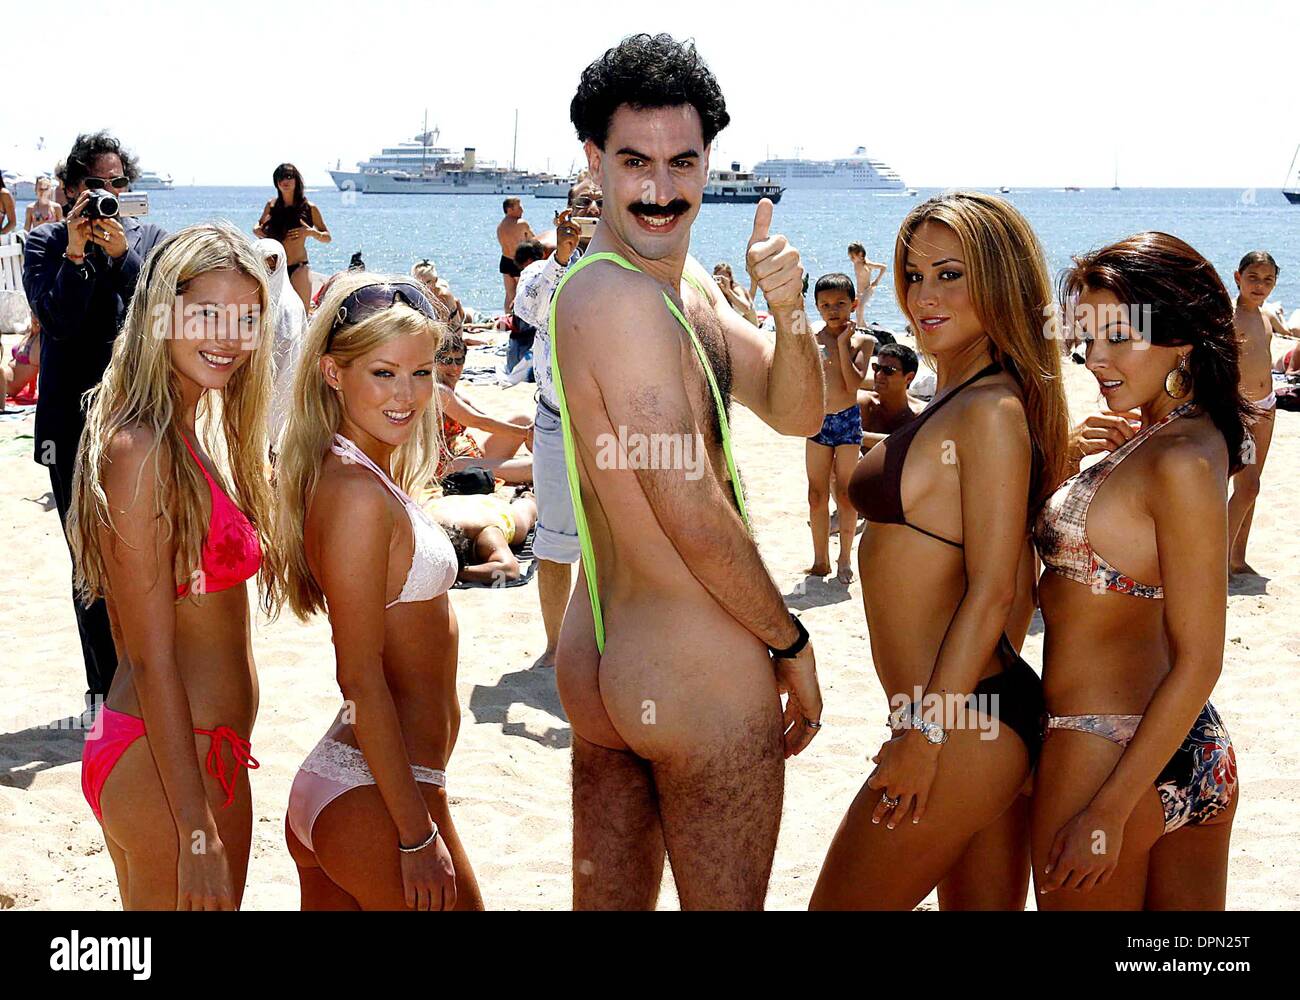 Borat complete with thong and girls Stock Photo - Alamy